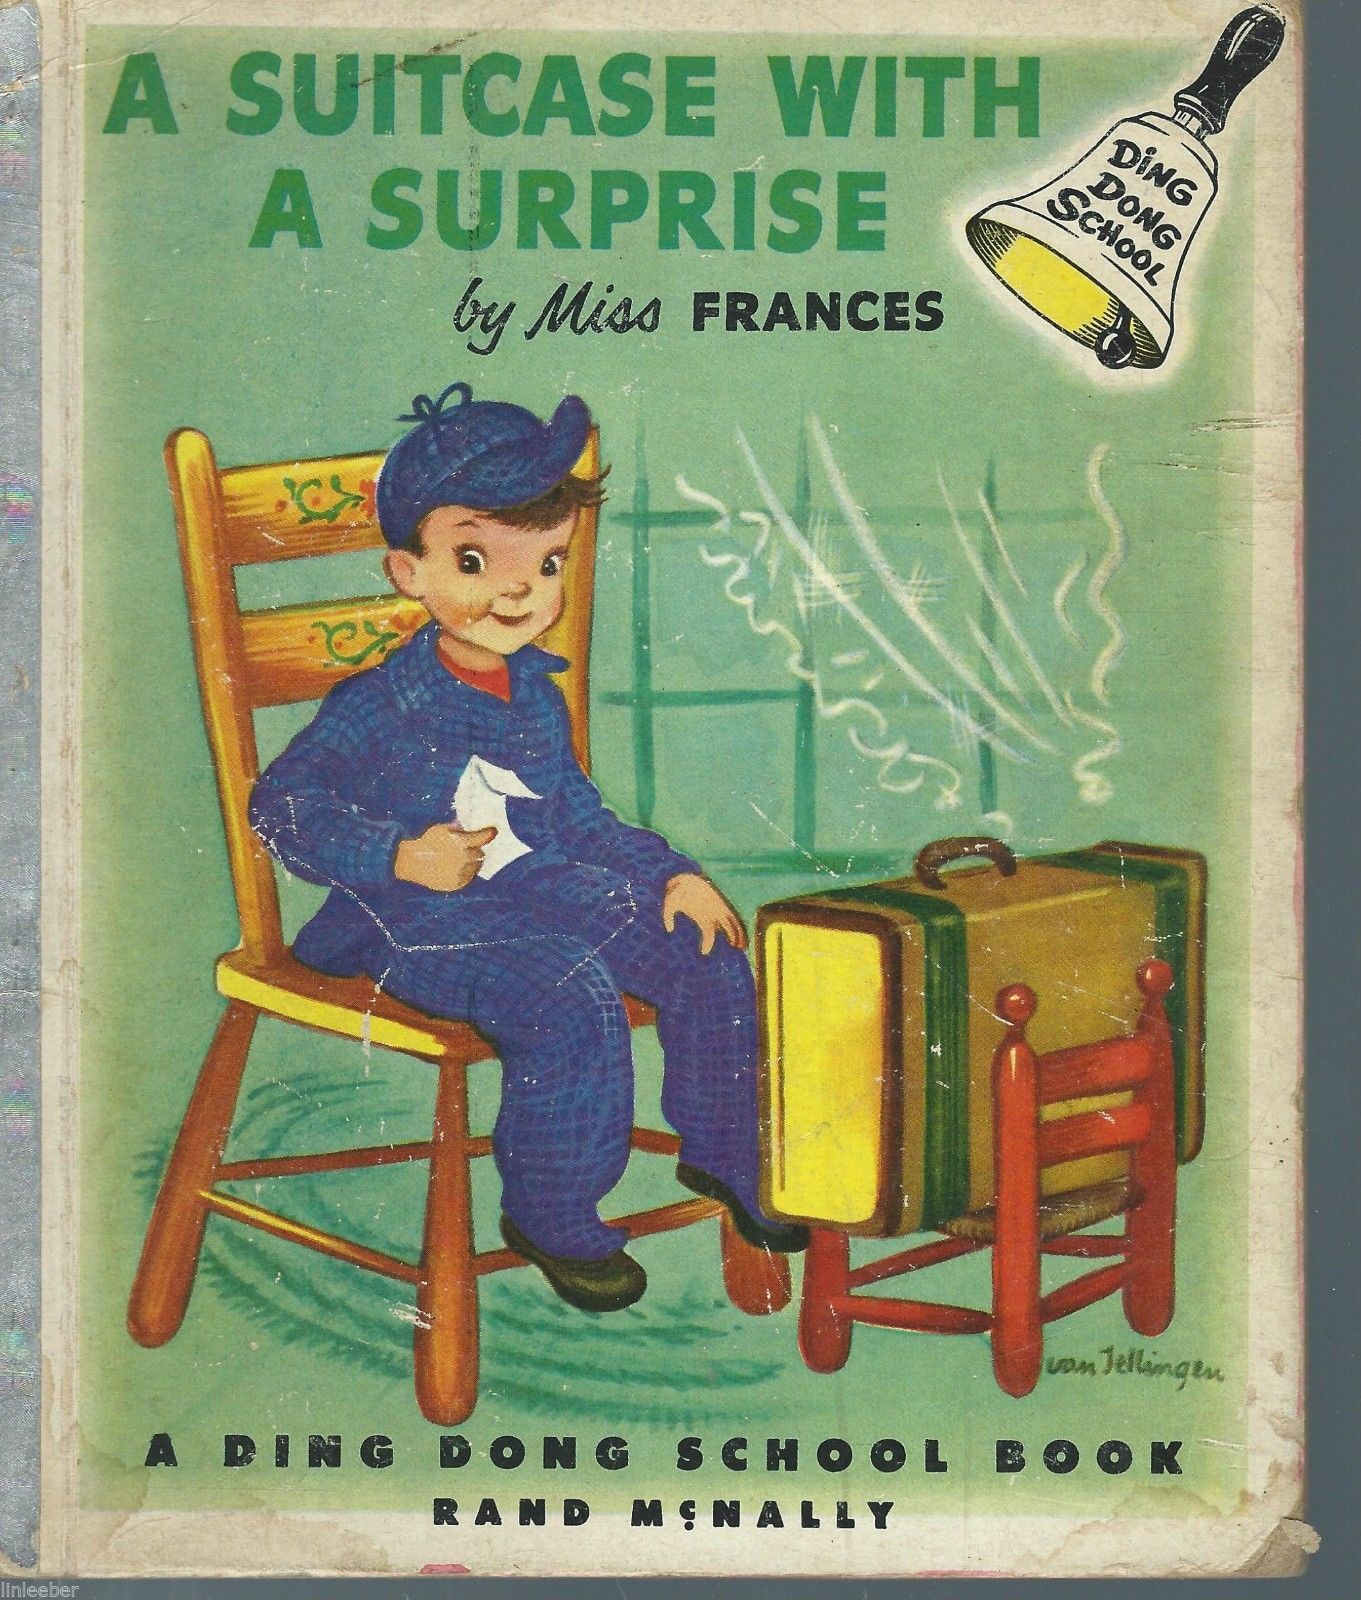 A SUITCASE WITH A SURPRISE-Miss Frances Ding Dong School Book;1953 ...